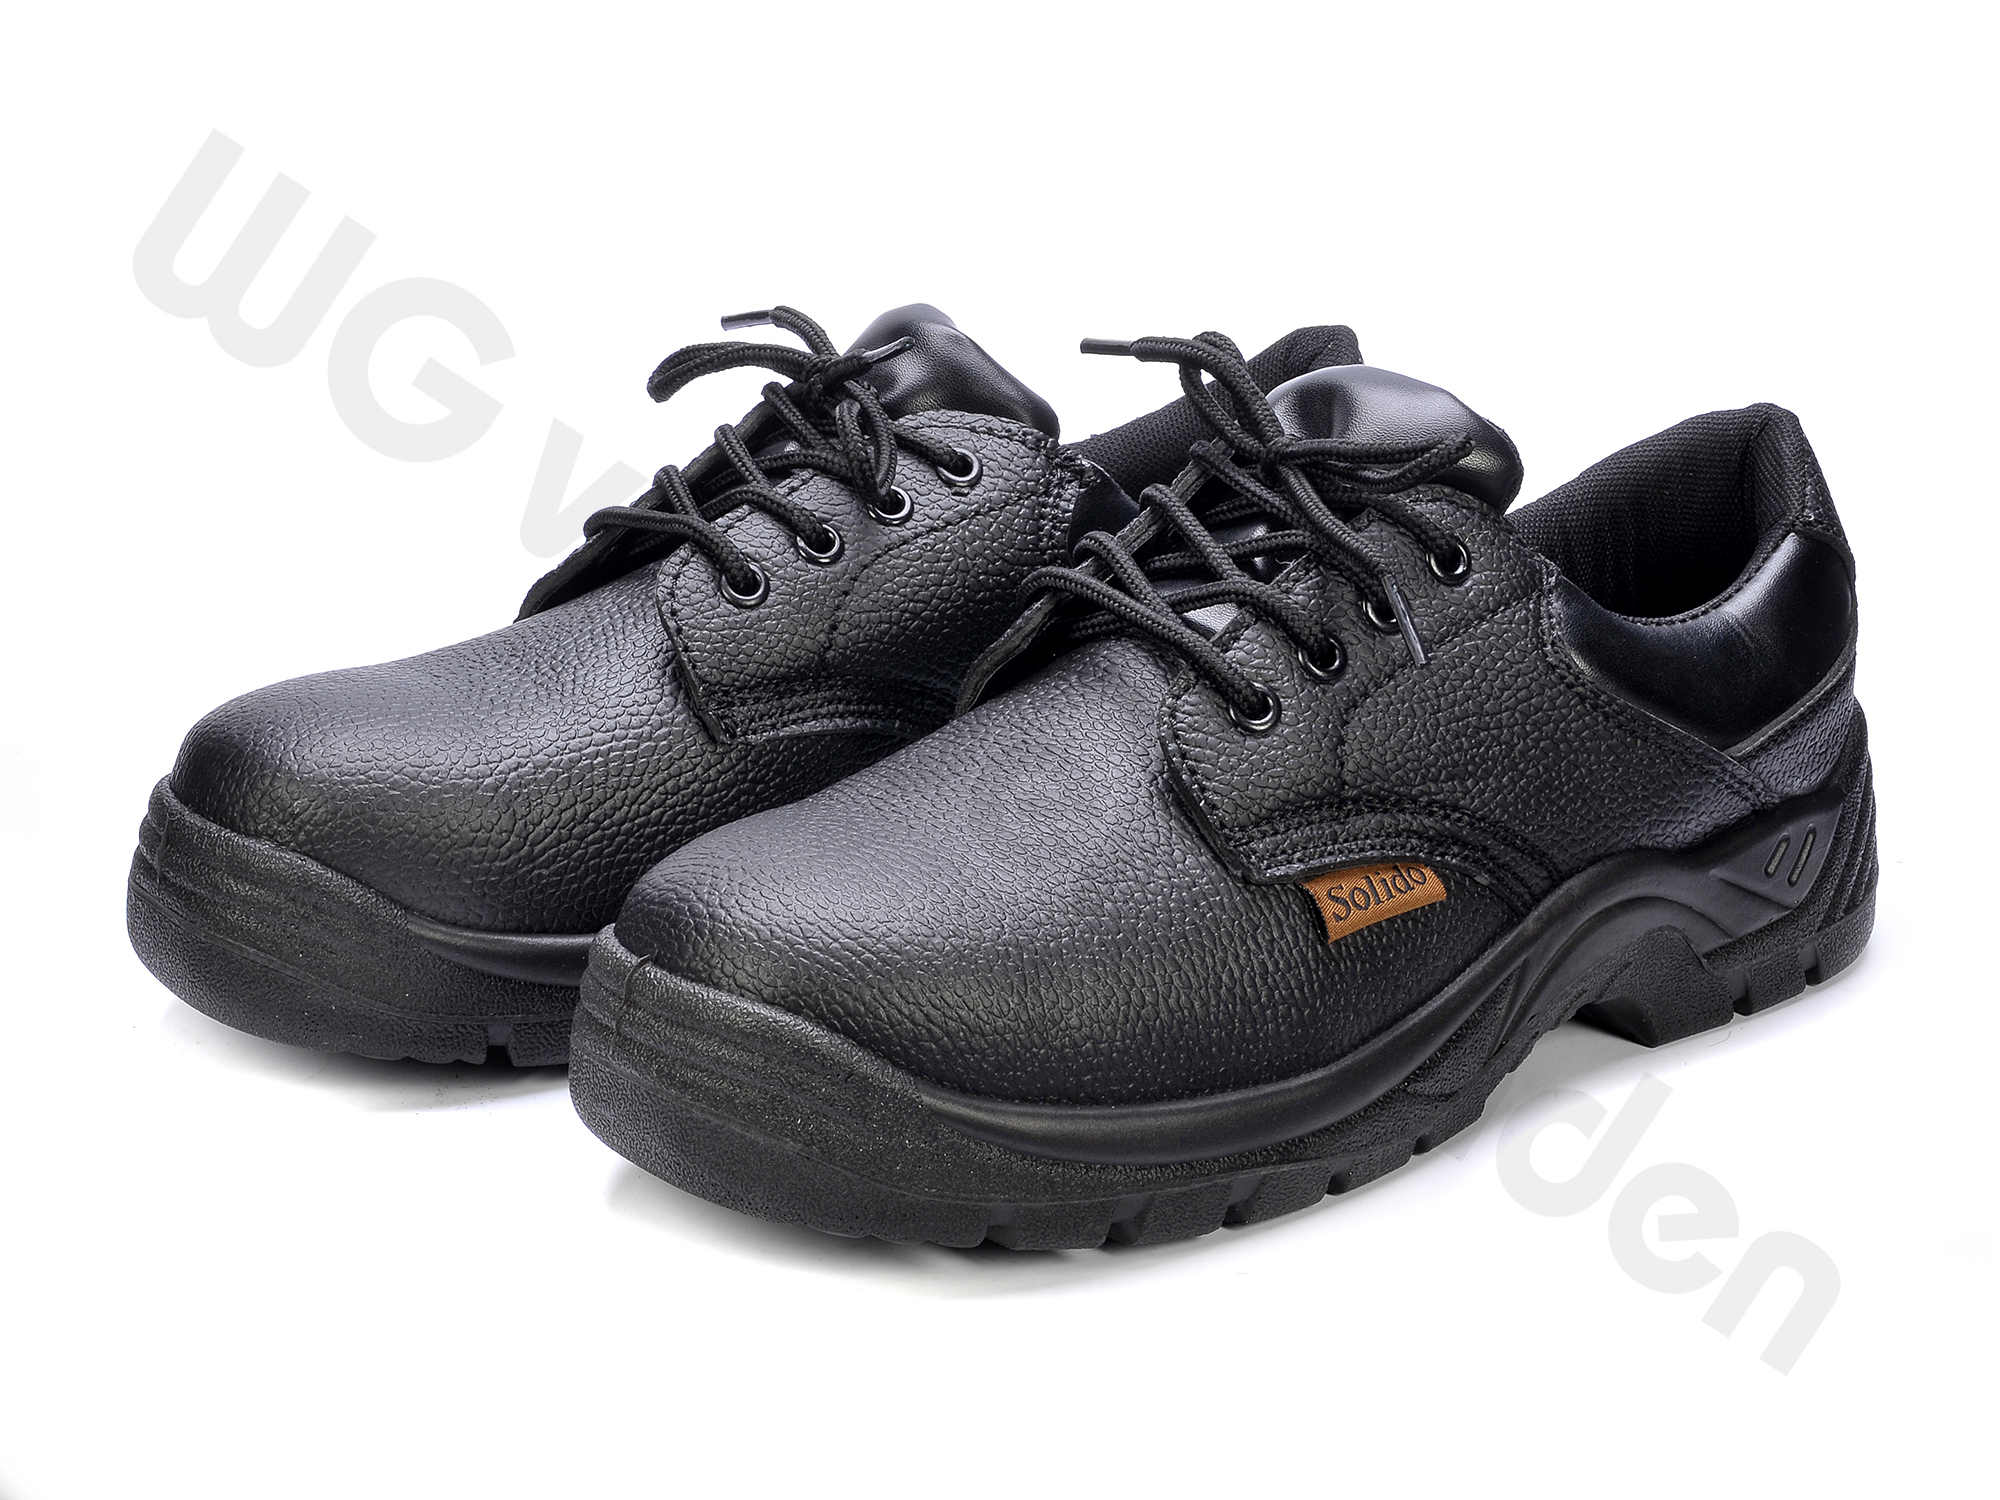 880605 SHOES SAFETY S1 WITH STEEL TOE SIZE 42 / 27CM CE